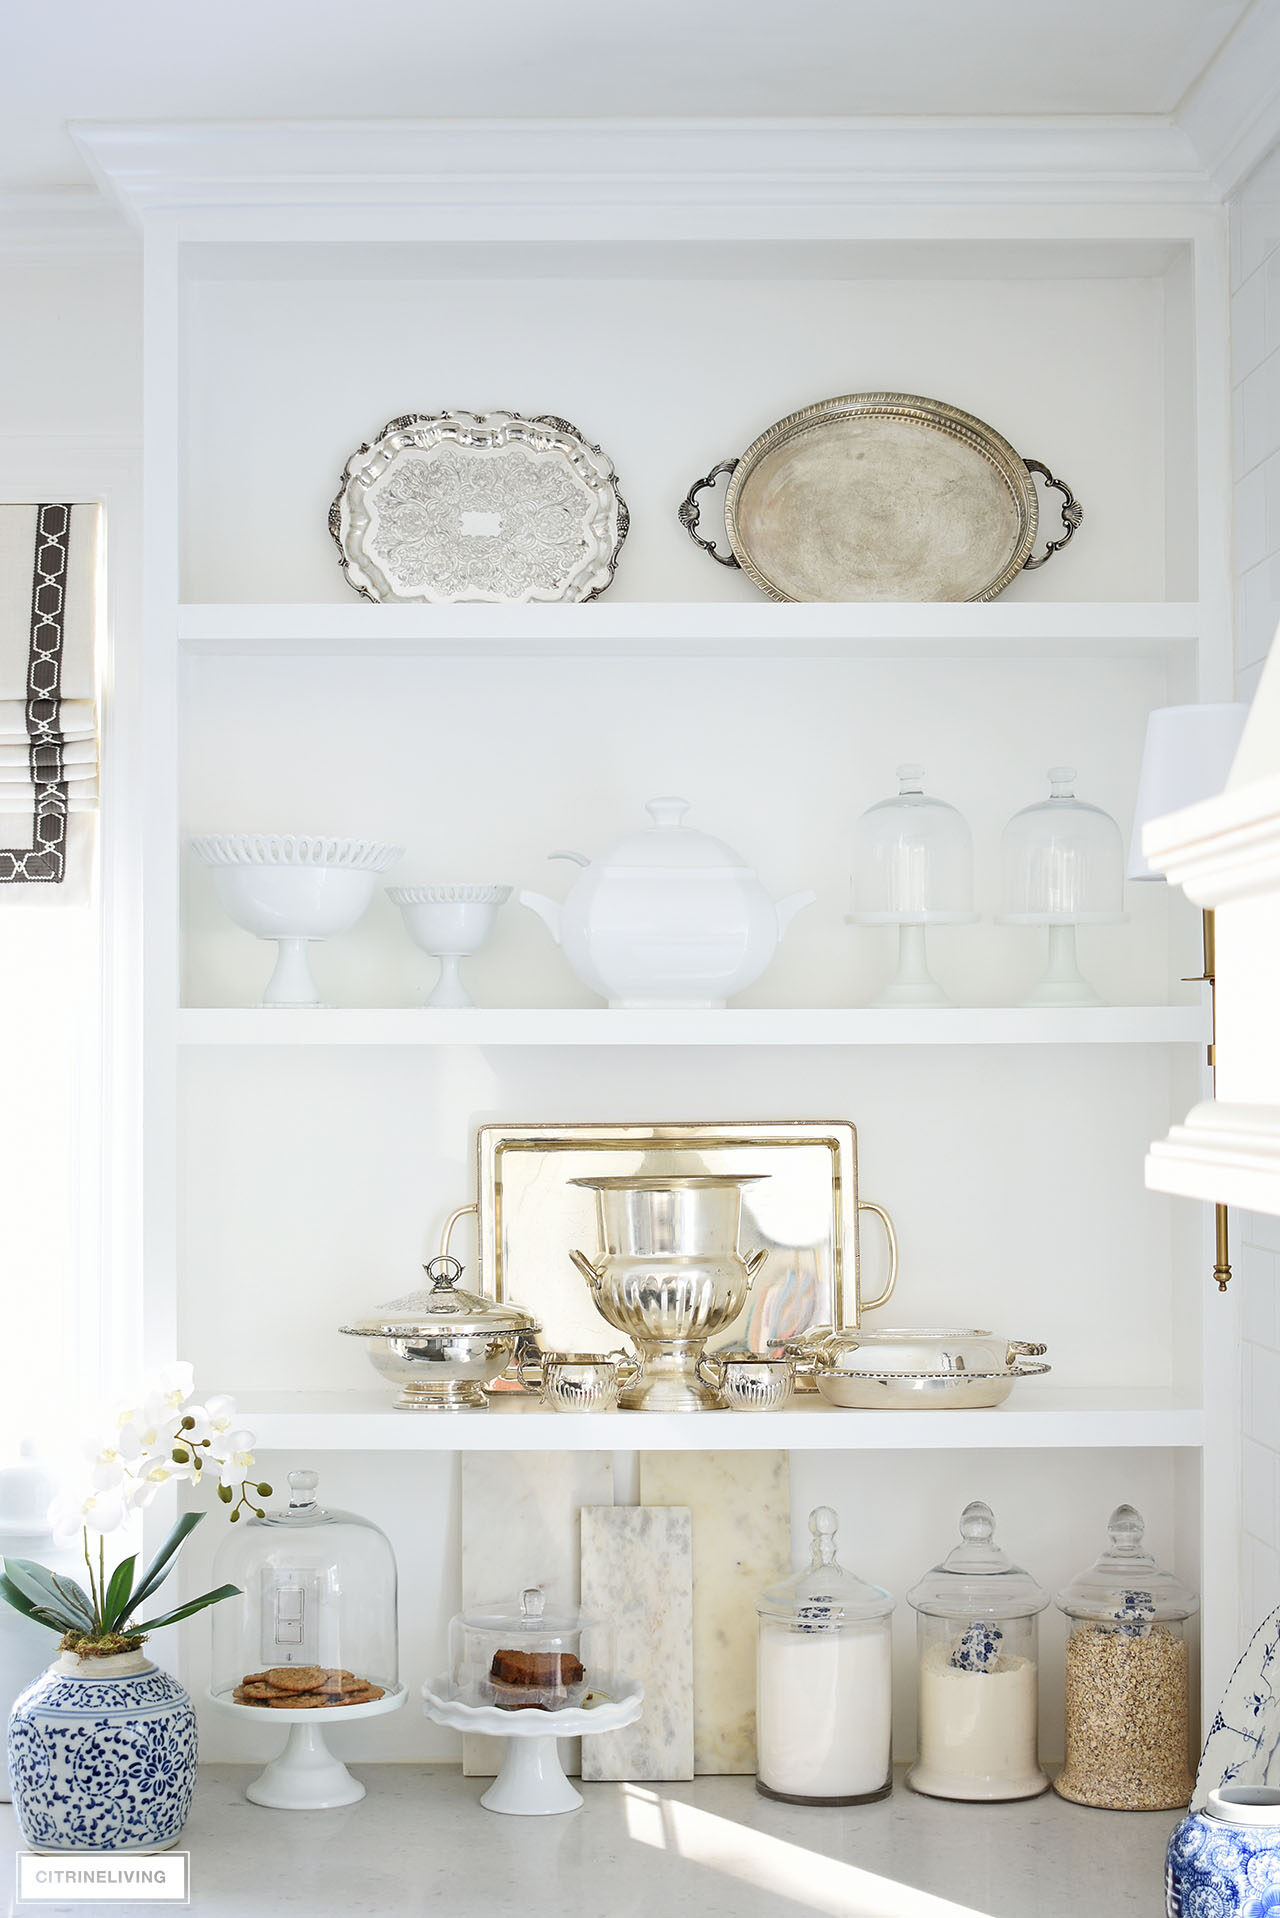 Traditional kitchen styled for spring with open shelves accessorized with silver serving pieces, white ceramics and glass apothecary canisters.